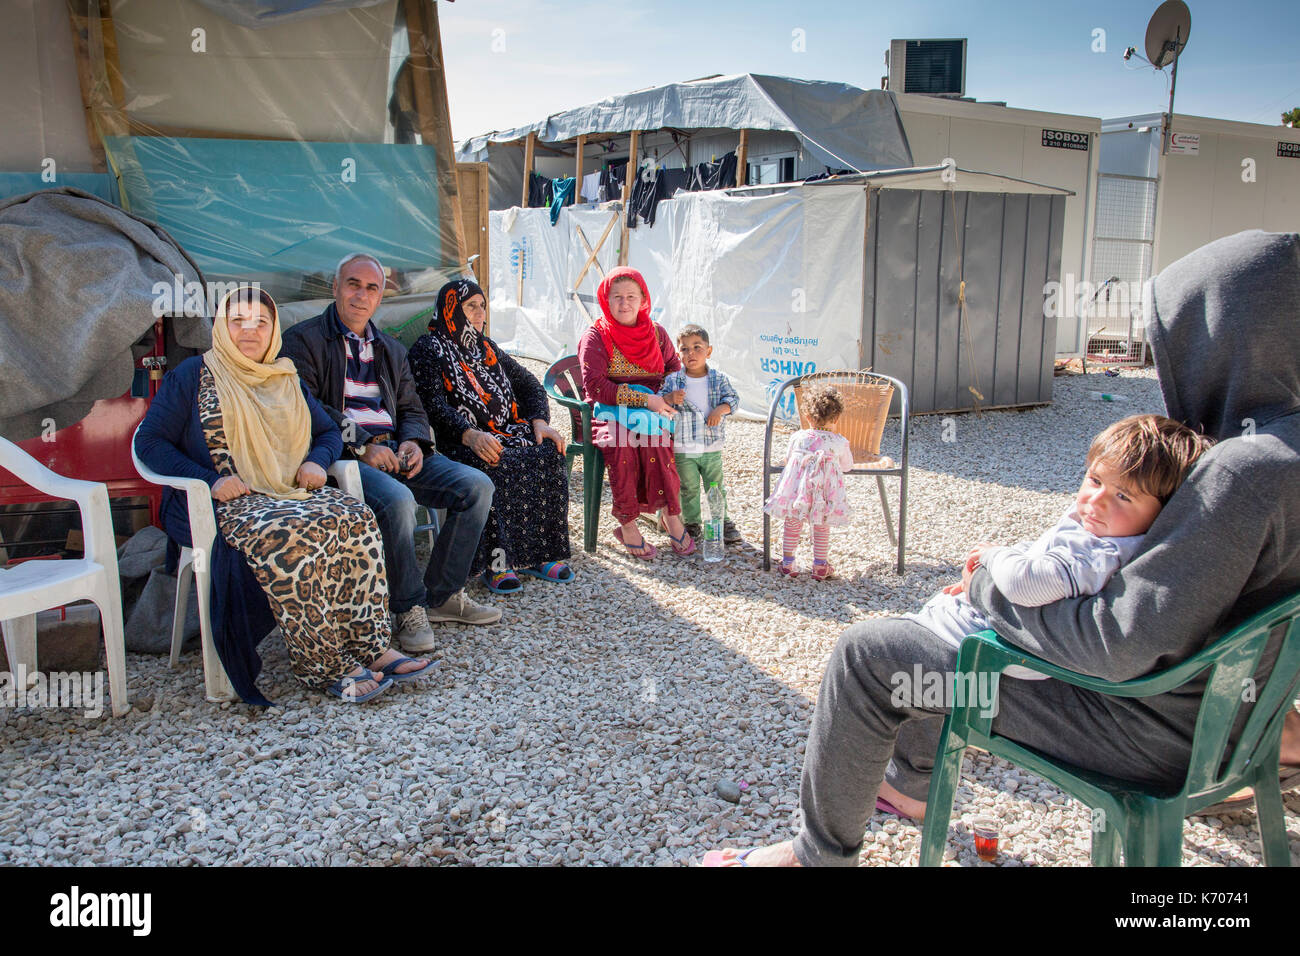 A group of Syrian Refugees, ranging from grandmotherly age to toddlers gather sociably on plastic chairs, between the Isobox houses at Ritsona Camp, Stock Photo